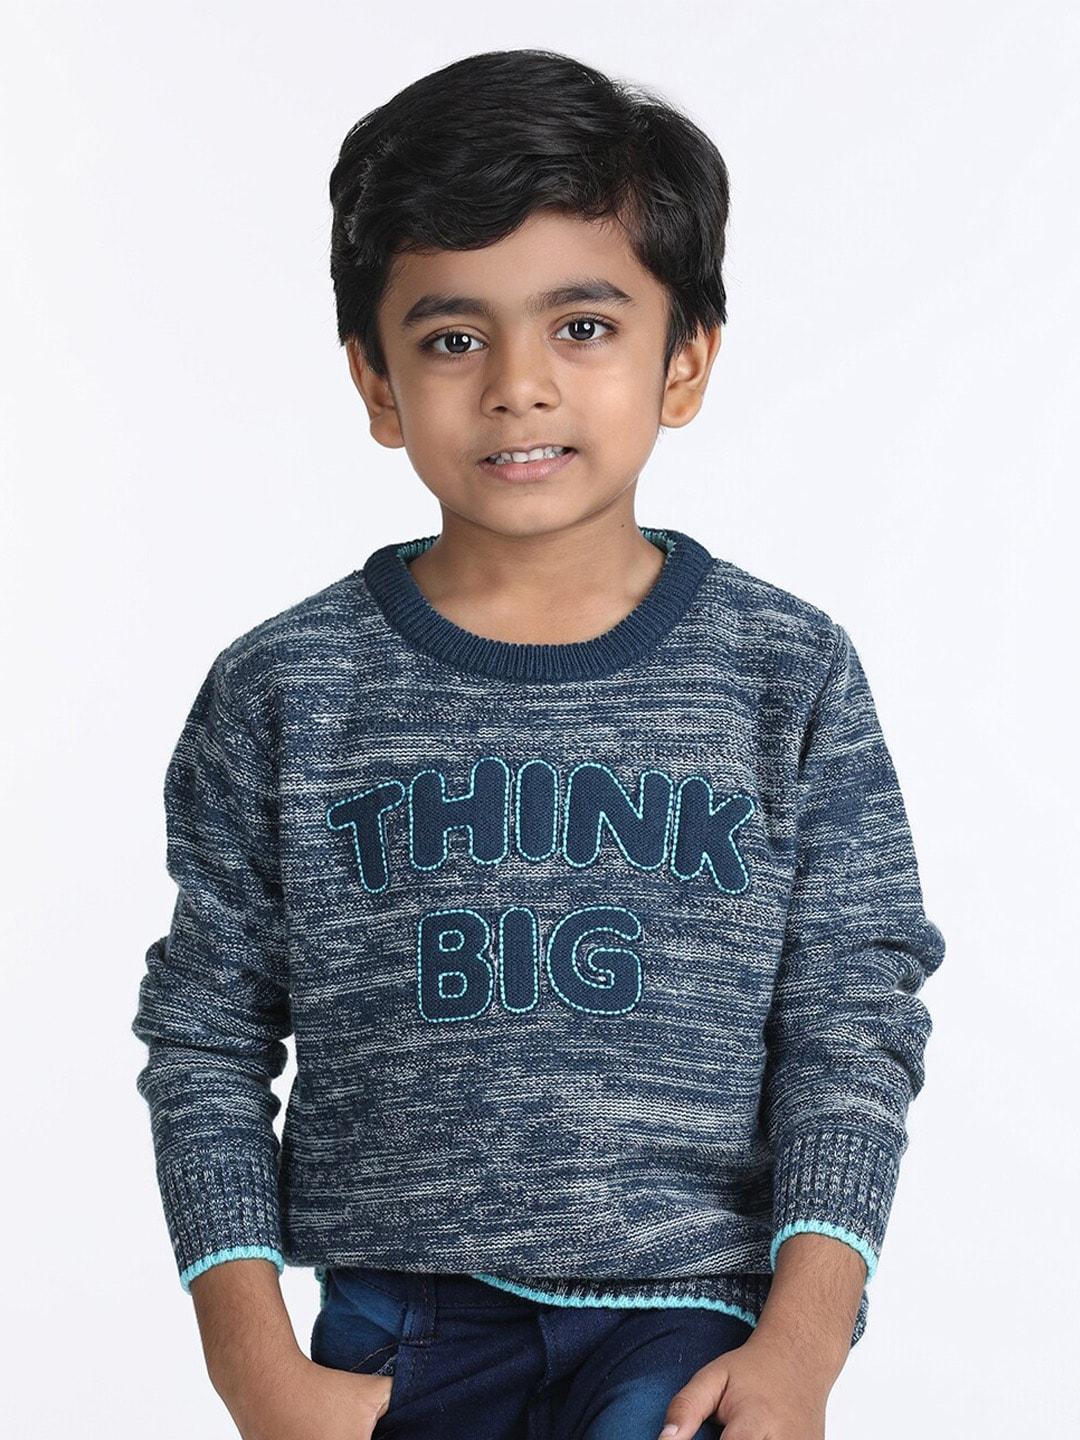 wingsfield boys embroidered pullover with embroidered detail